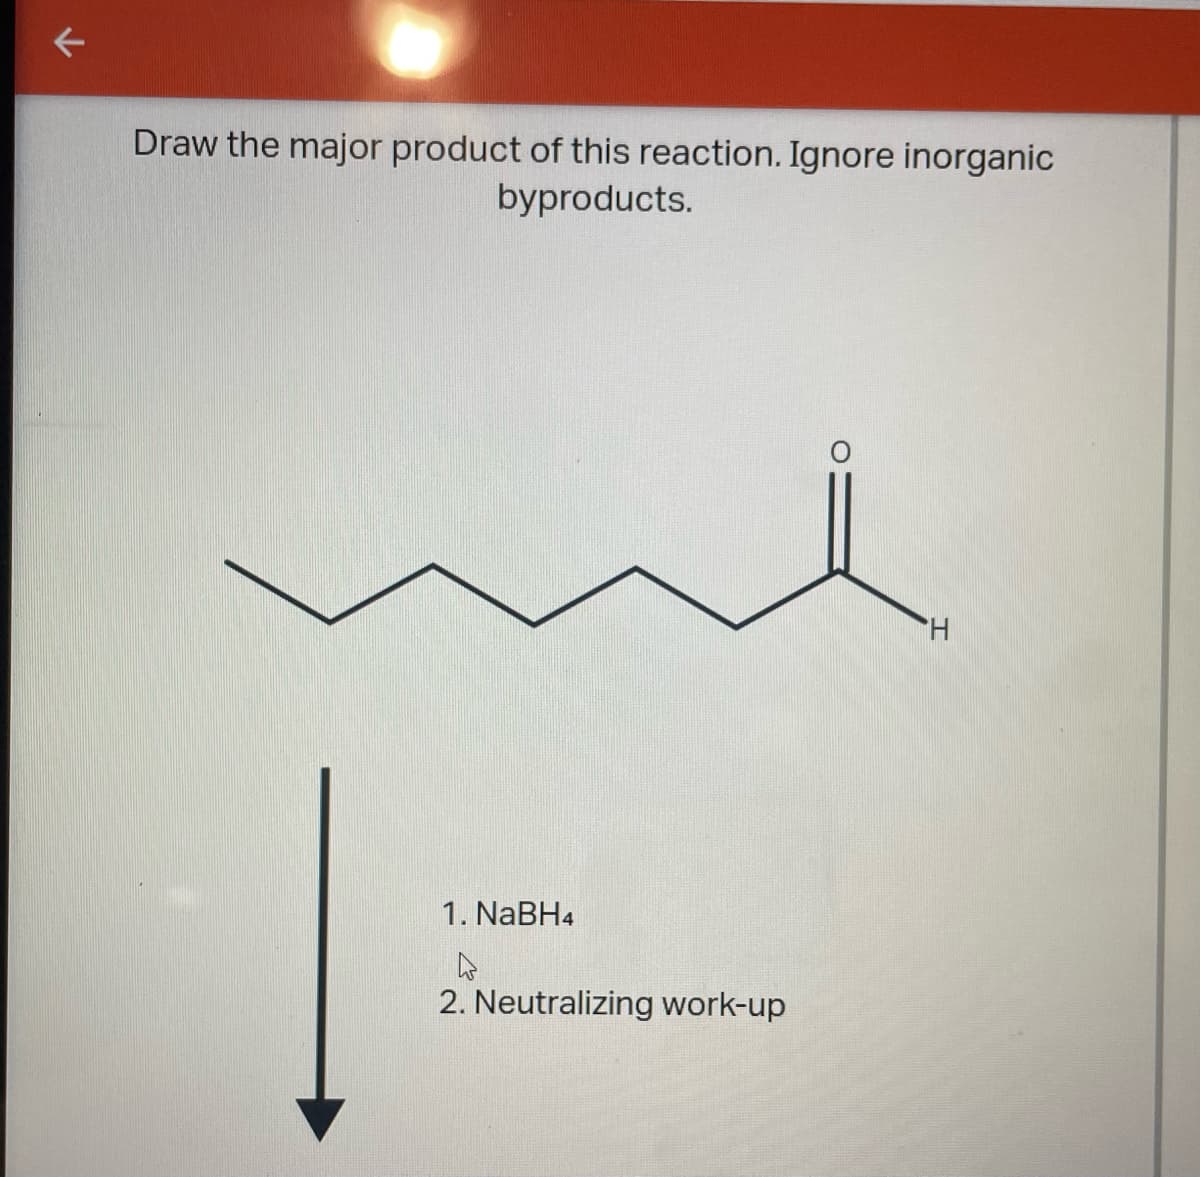 ←
Draw the major product of this reaction. Ignore inorganic
byproducts.
H
1. NaBH4
2. Neutralizing work-up